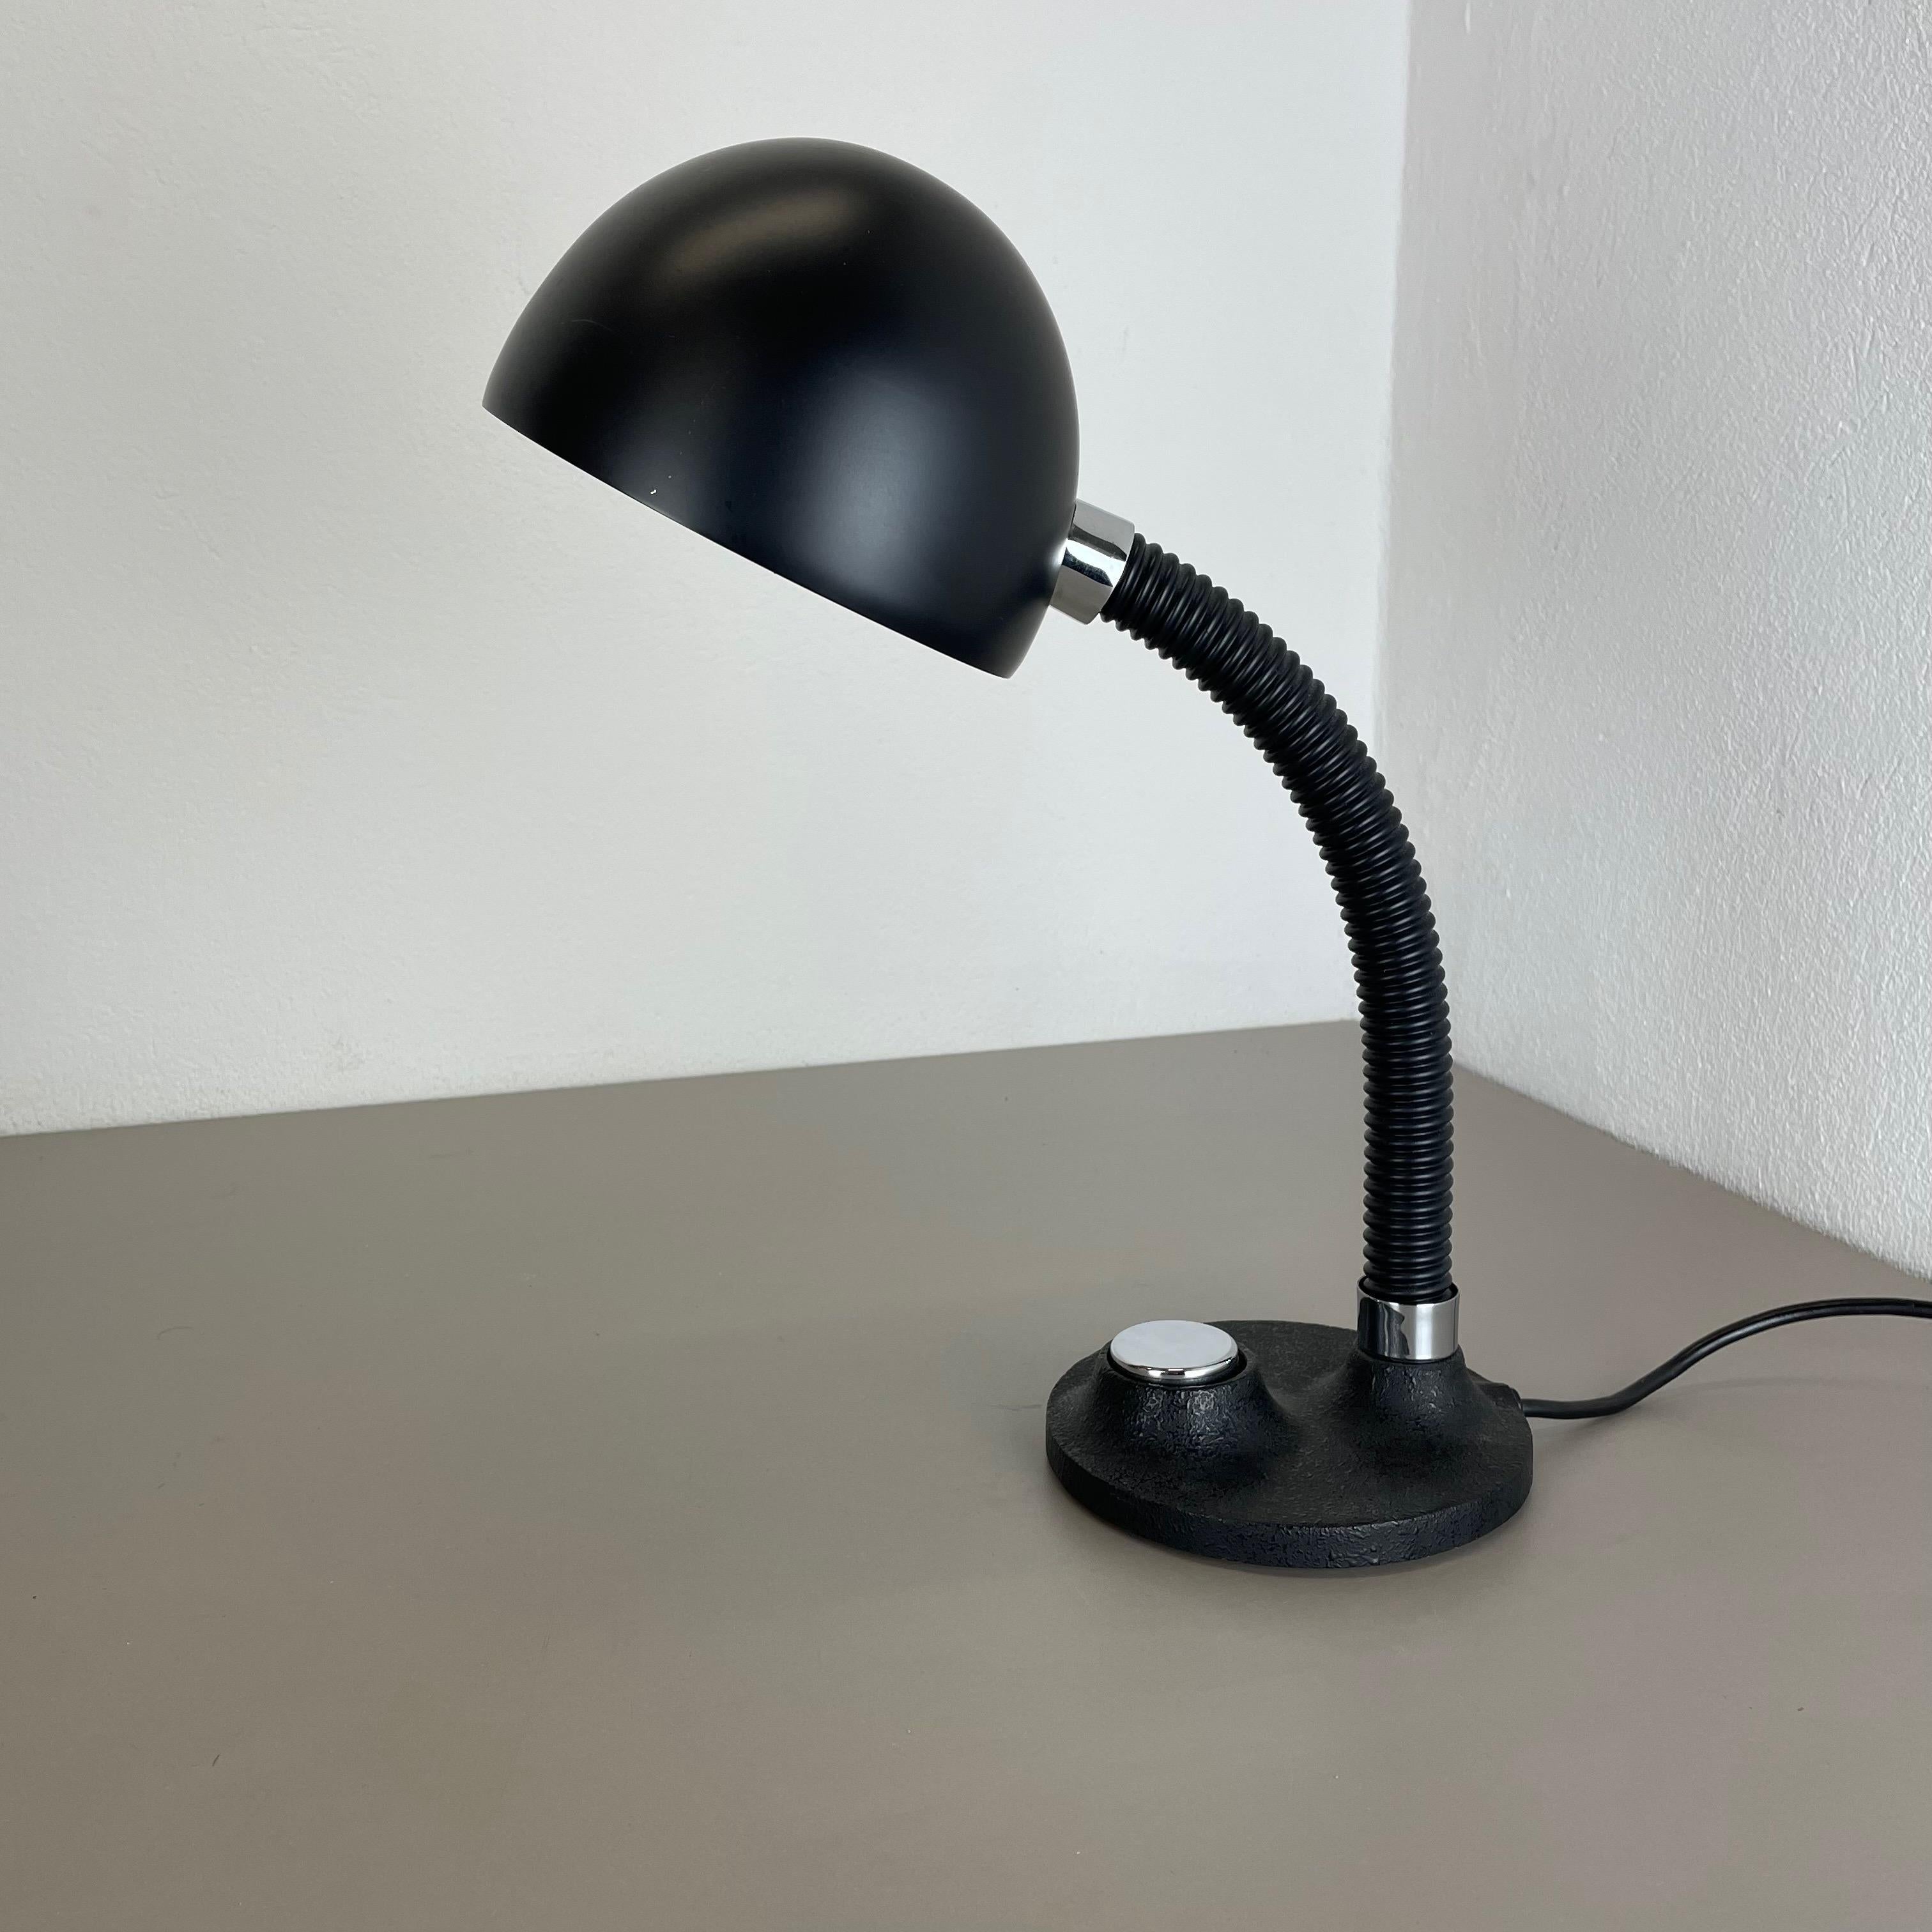 20th Century Modernist SPACE AGE Metal Table Light by Hillebrand Leuchten, Germany, 1970s For Sale